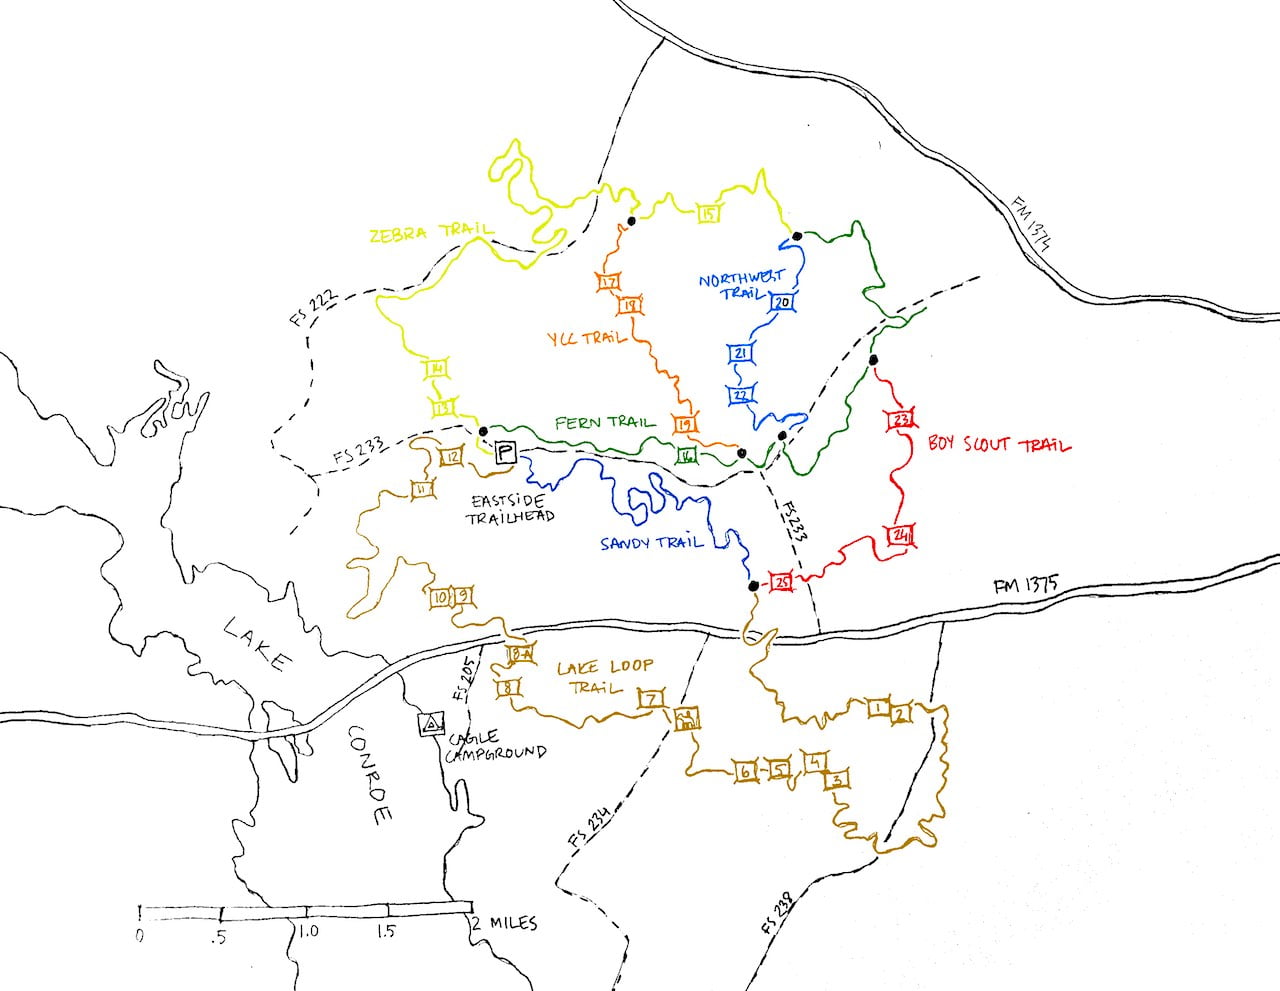 Sam Houston National Forest trail map showing the eastside off road trails in different colors